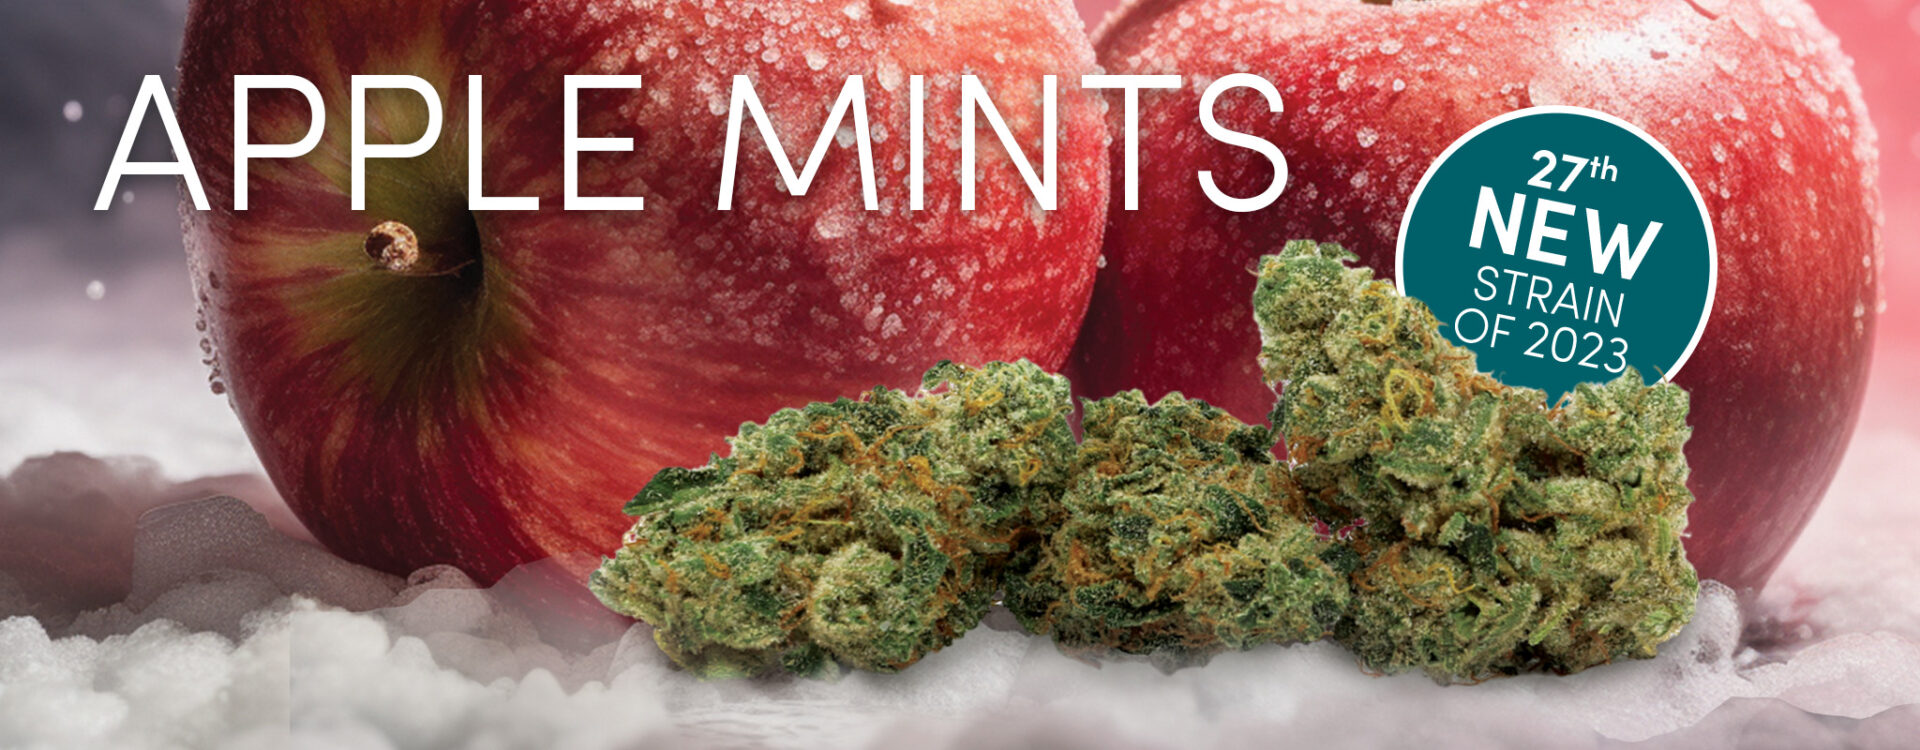 Apple mints in the snow.